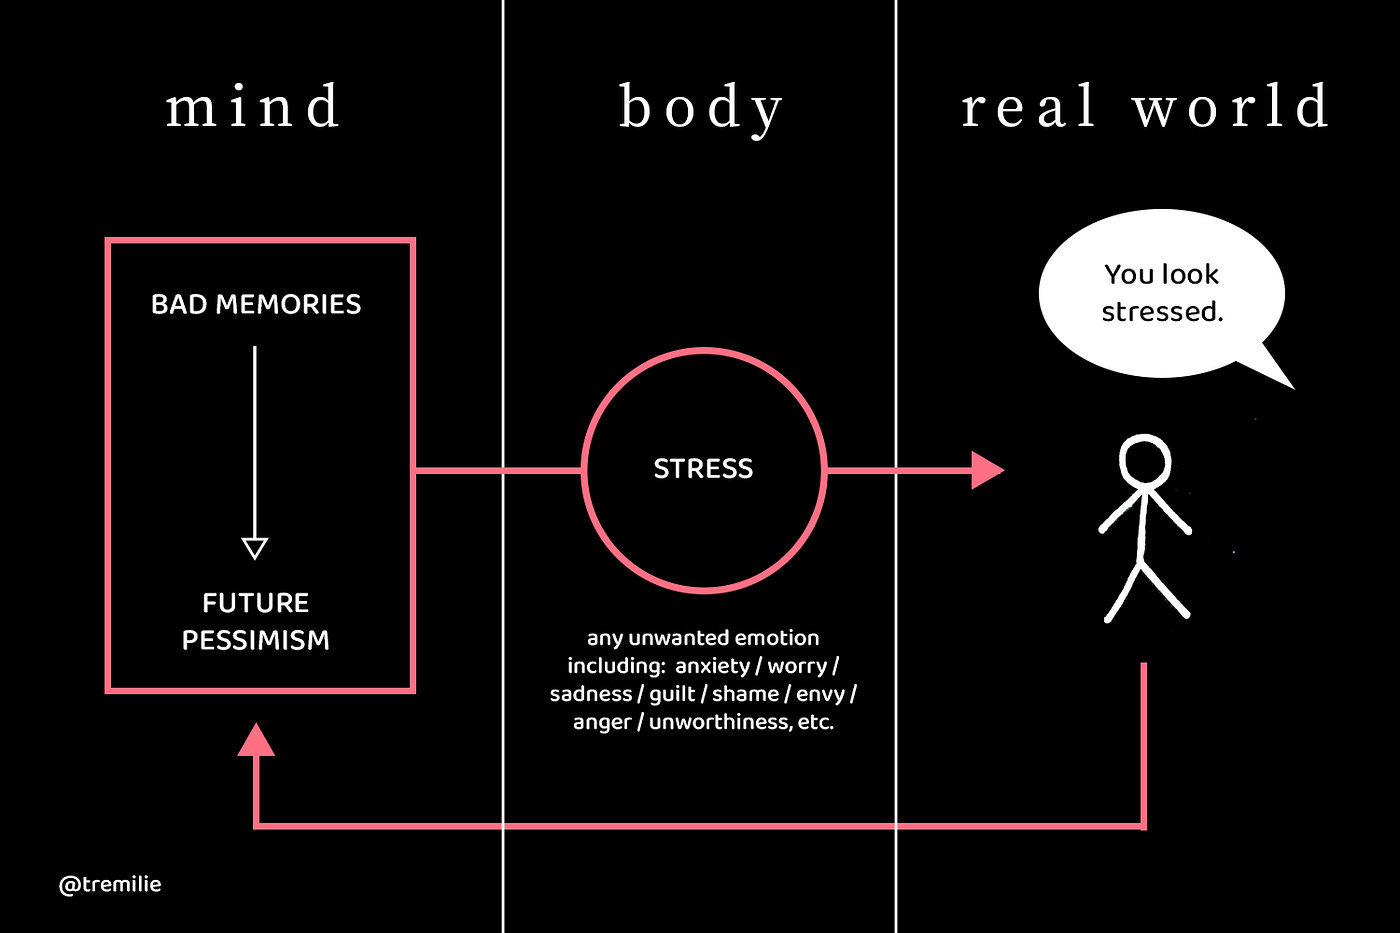 Diagram representing how the mind fuels stress, and stress is perpetuated into the real world (with other people confirming our stress).